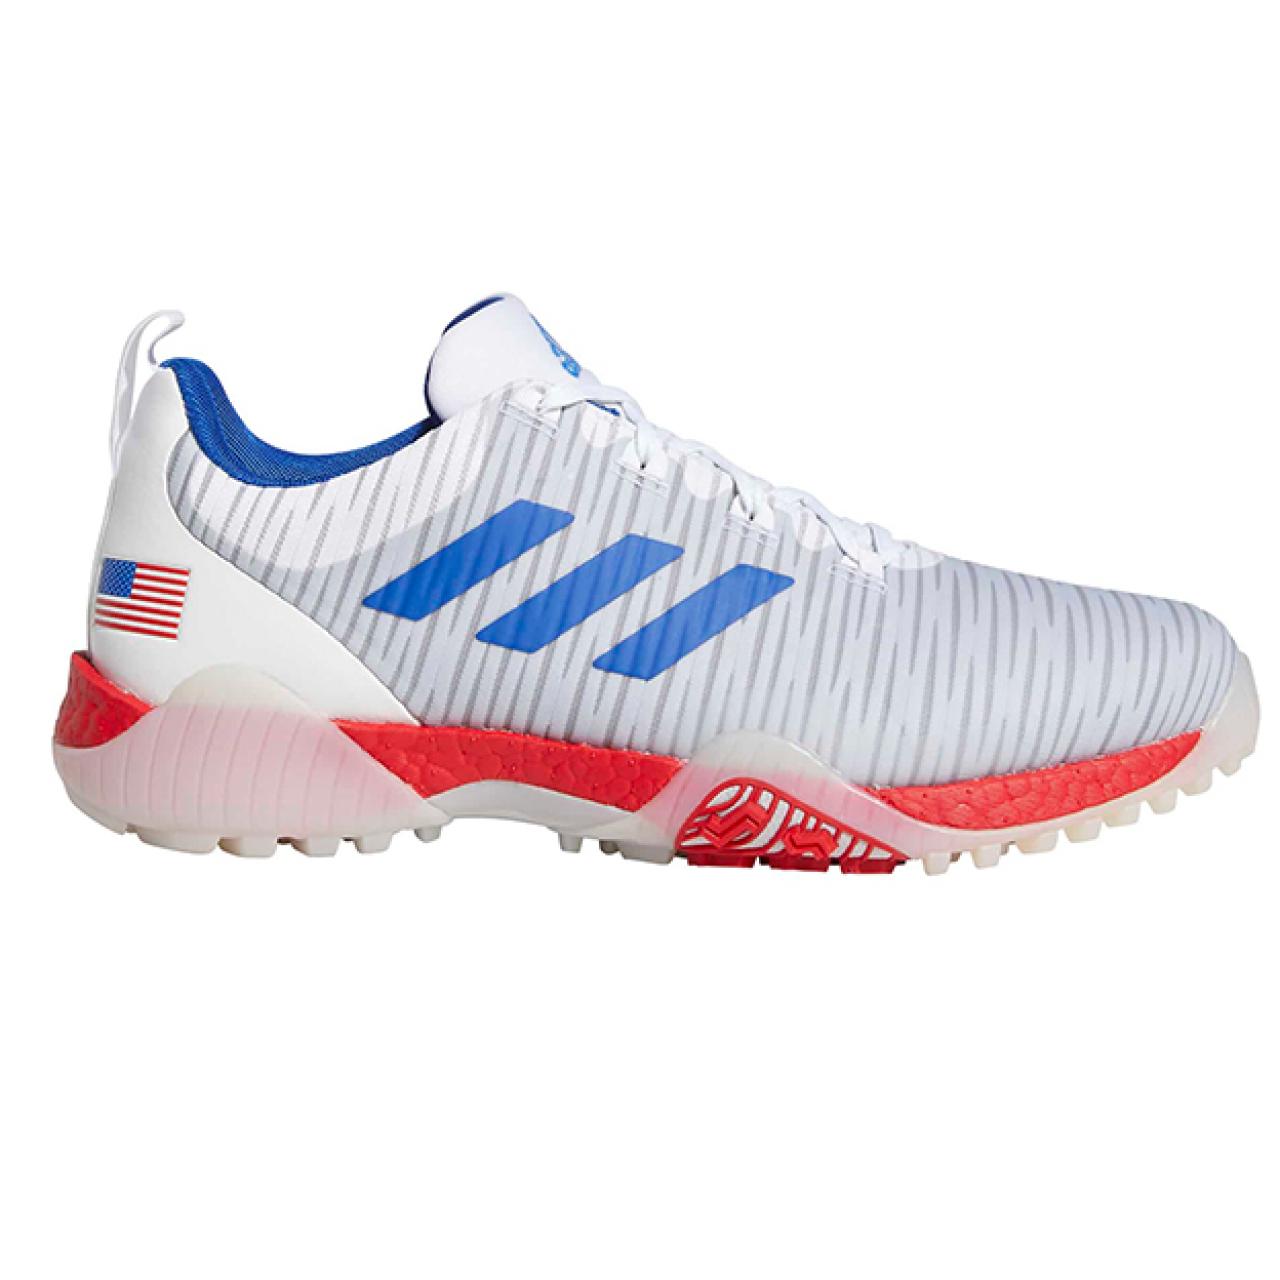 Adidas releases Codechaos golf shoes in ultra-patriotic, limited-edition version | Golf Clubs, | GolfDigest.com